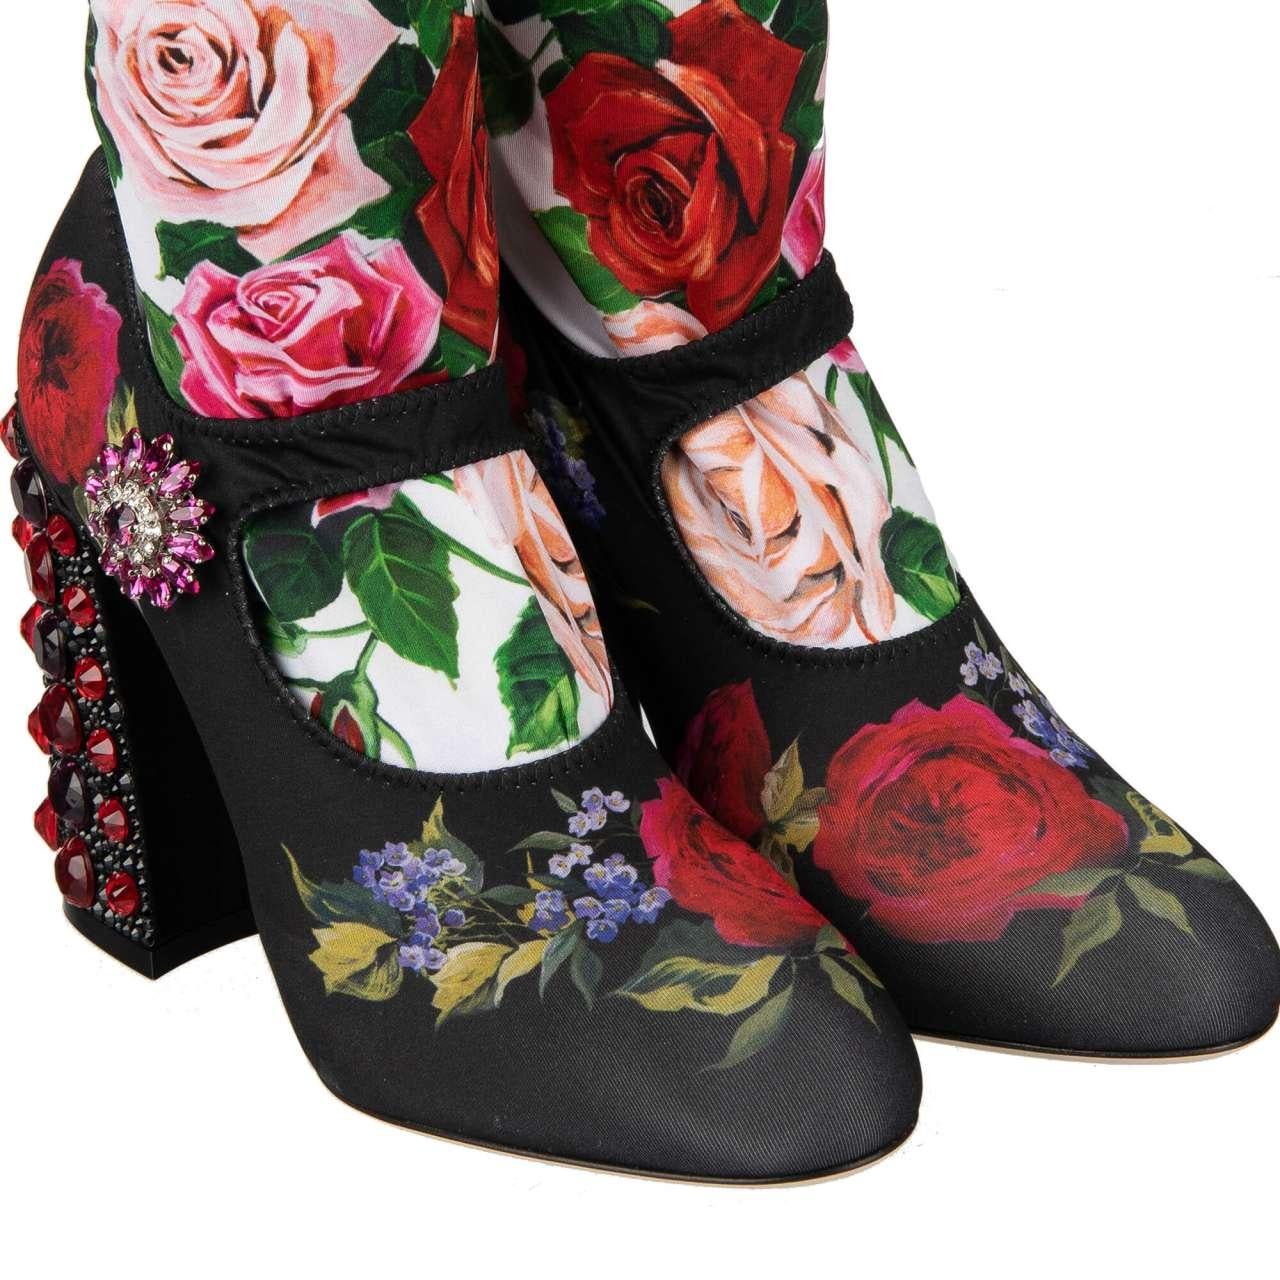 - Elastic Socks Pumps / Boots VALLY with roses print, crystals embellished block heel and crystals brooch by DOLCE & GABBANA - RUNWAY - Dolce&Gabbana Fashion Show - Former RRP: EUR 1.450 - MADE IN ITALY - New with Box - Elastic, floral roses printed